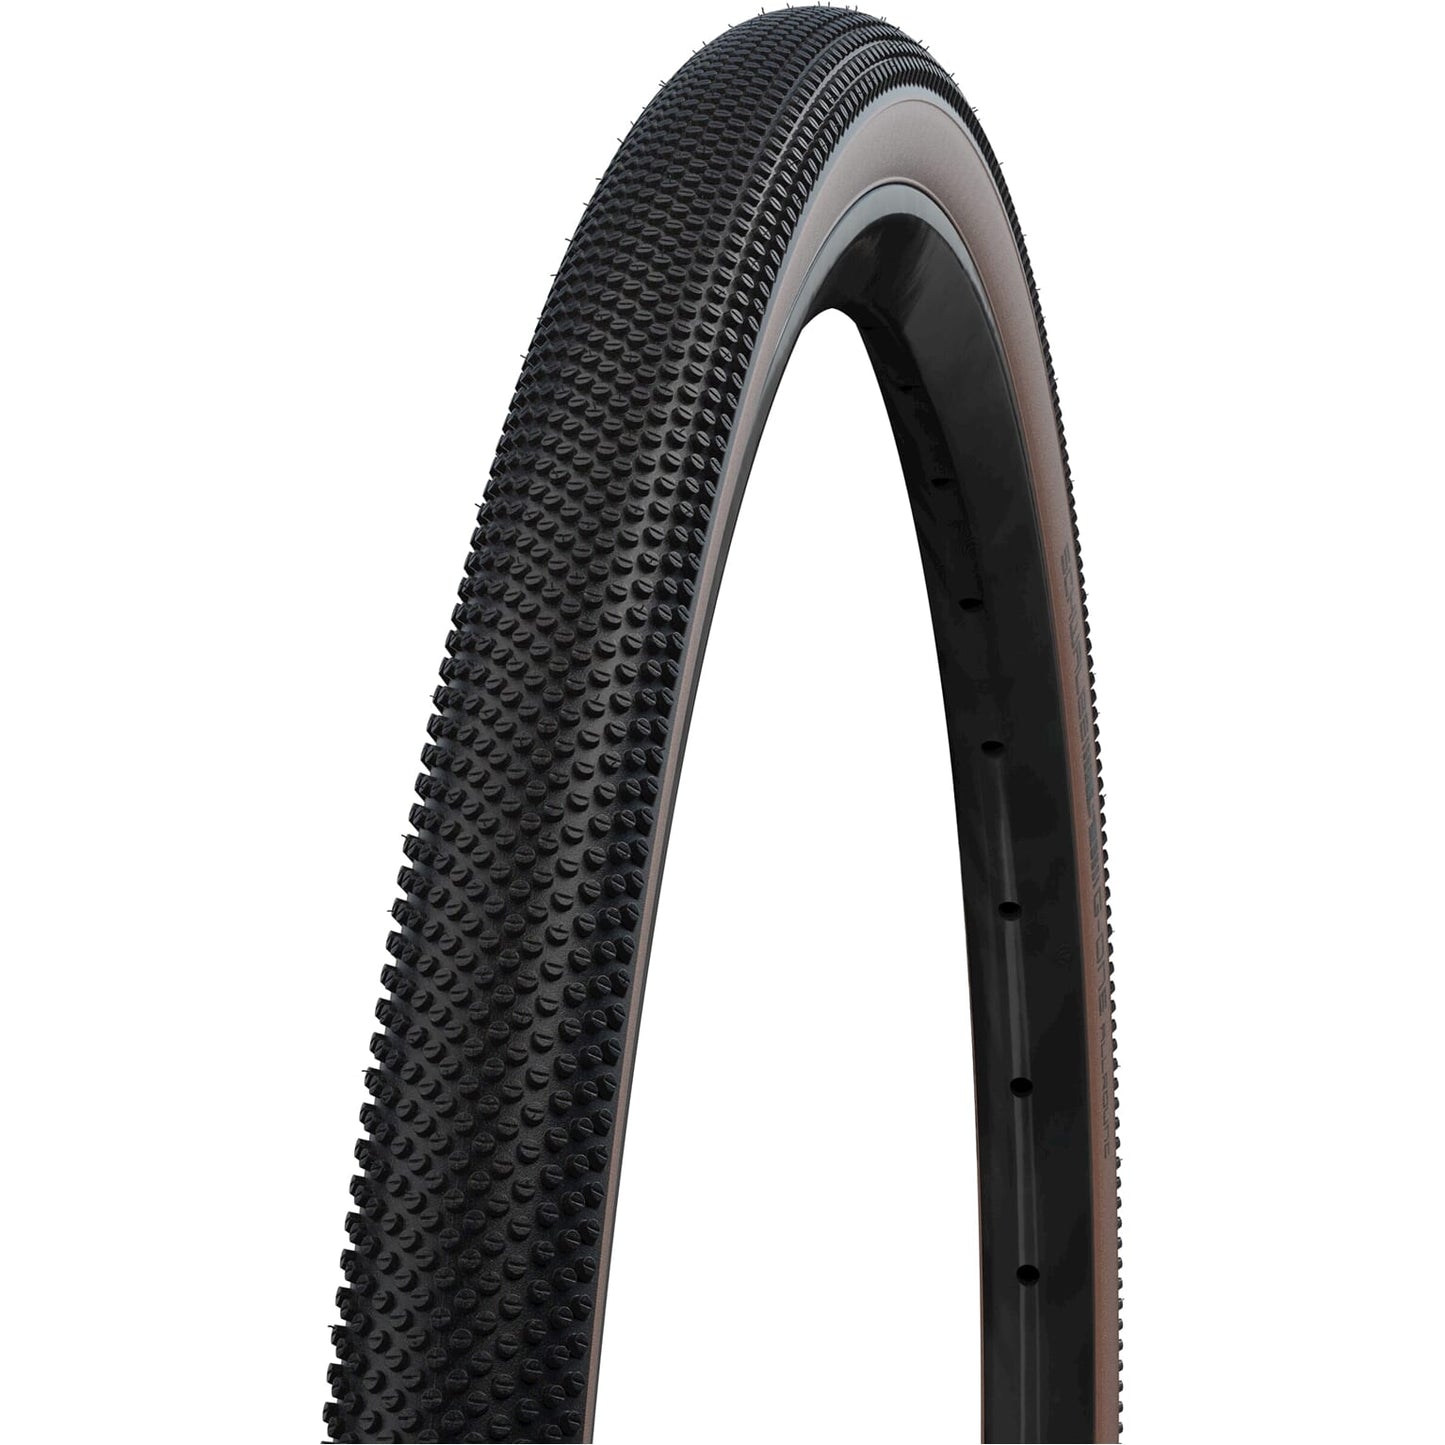 Schwalbe G-One Allround RaceGuard 28 x 1.50 40-622 mm-bronce lateral